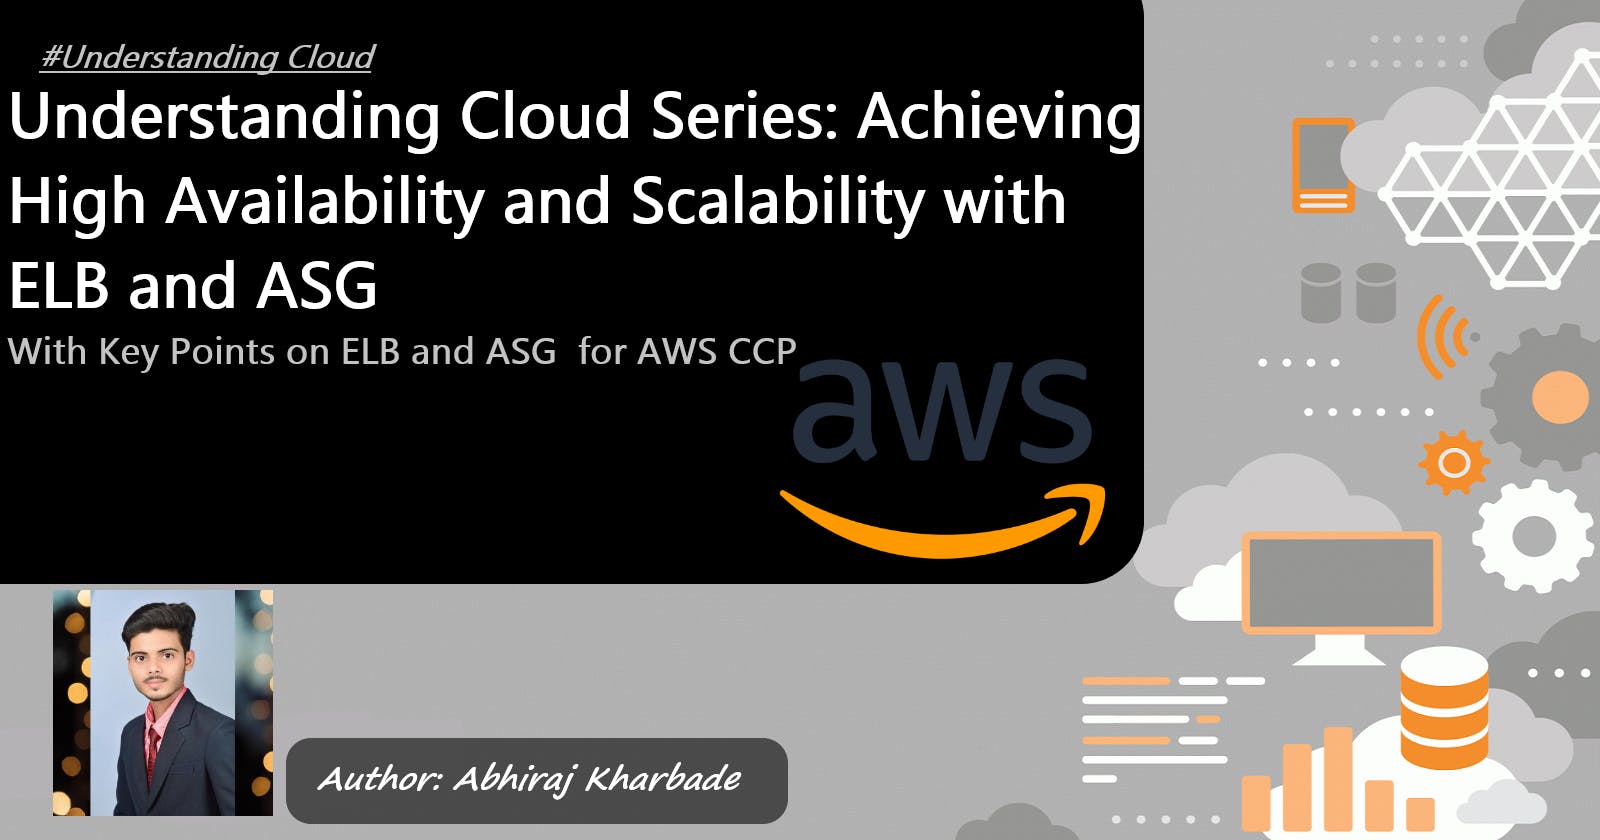 Understanding Cloud Series: Achieving High Availability and Scalability with ELB and ASG